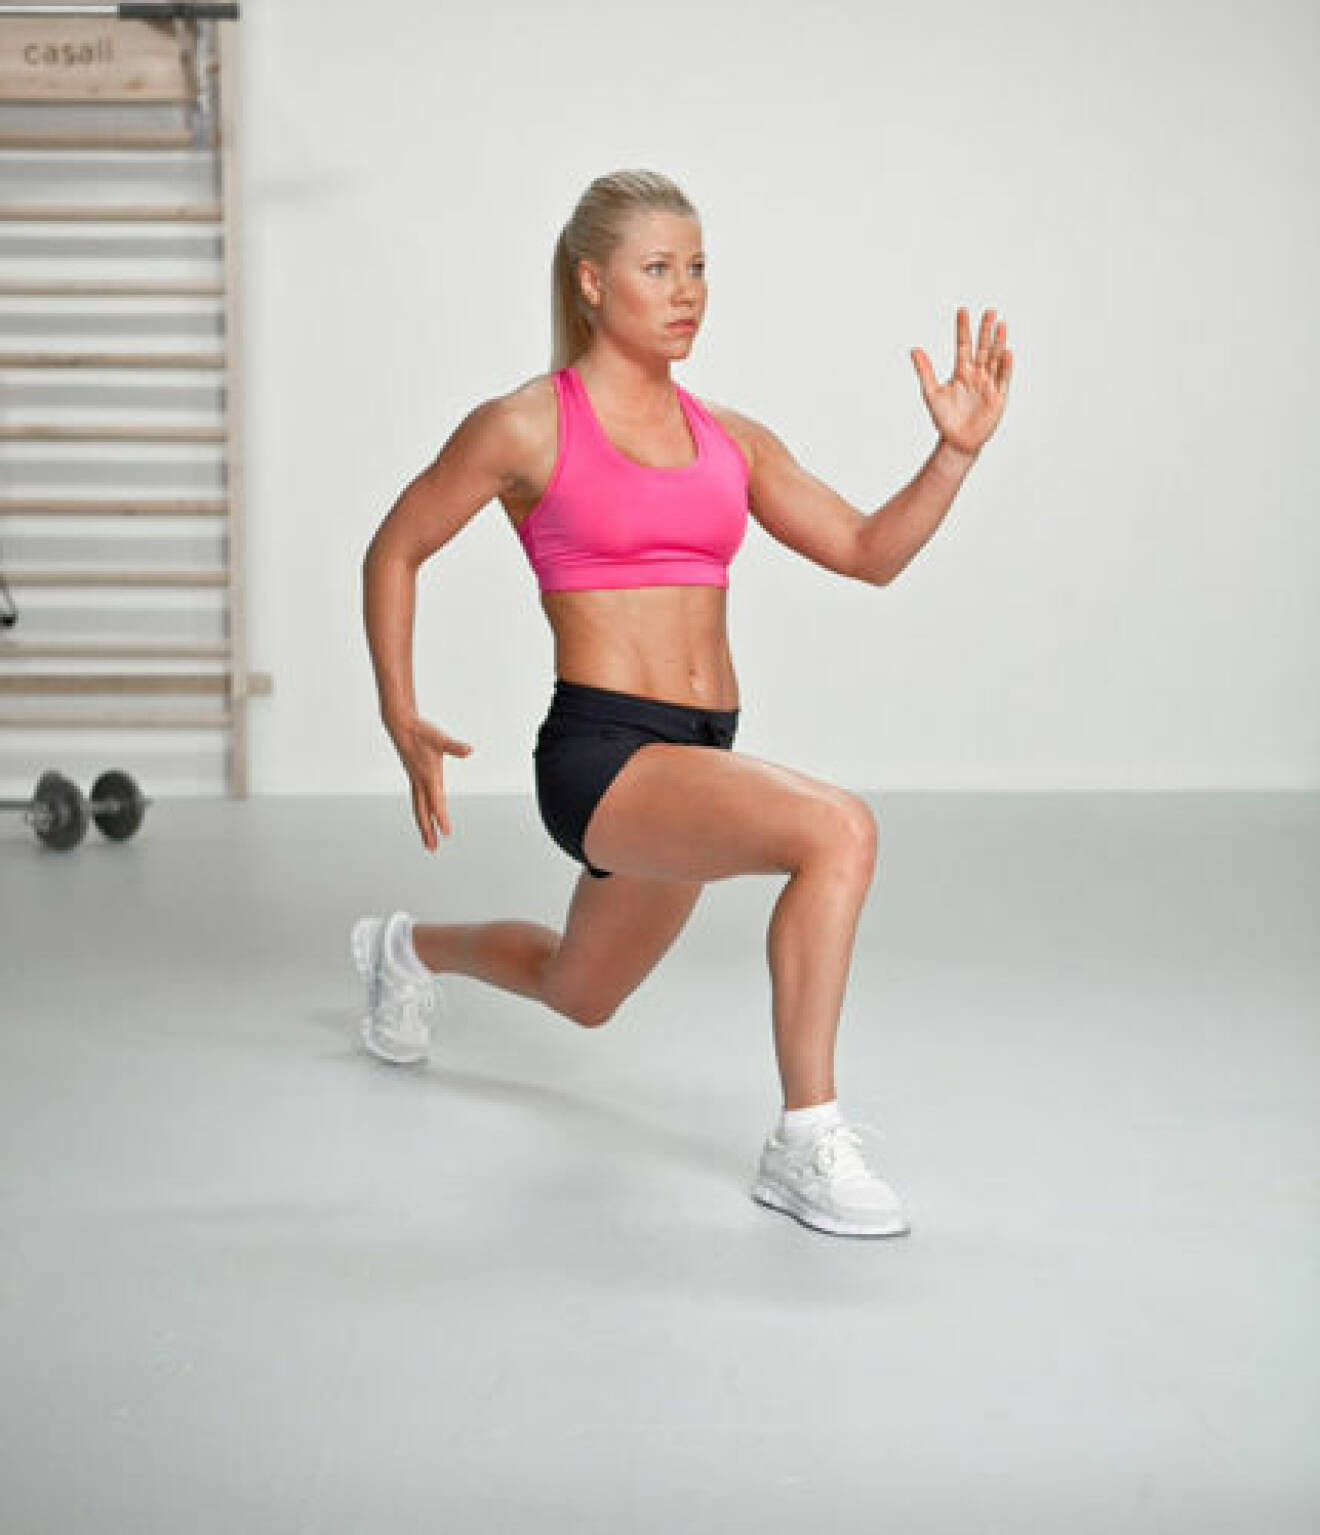 JUMPING SPLIT LUNGES 1